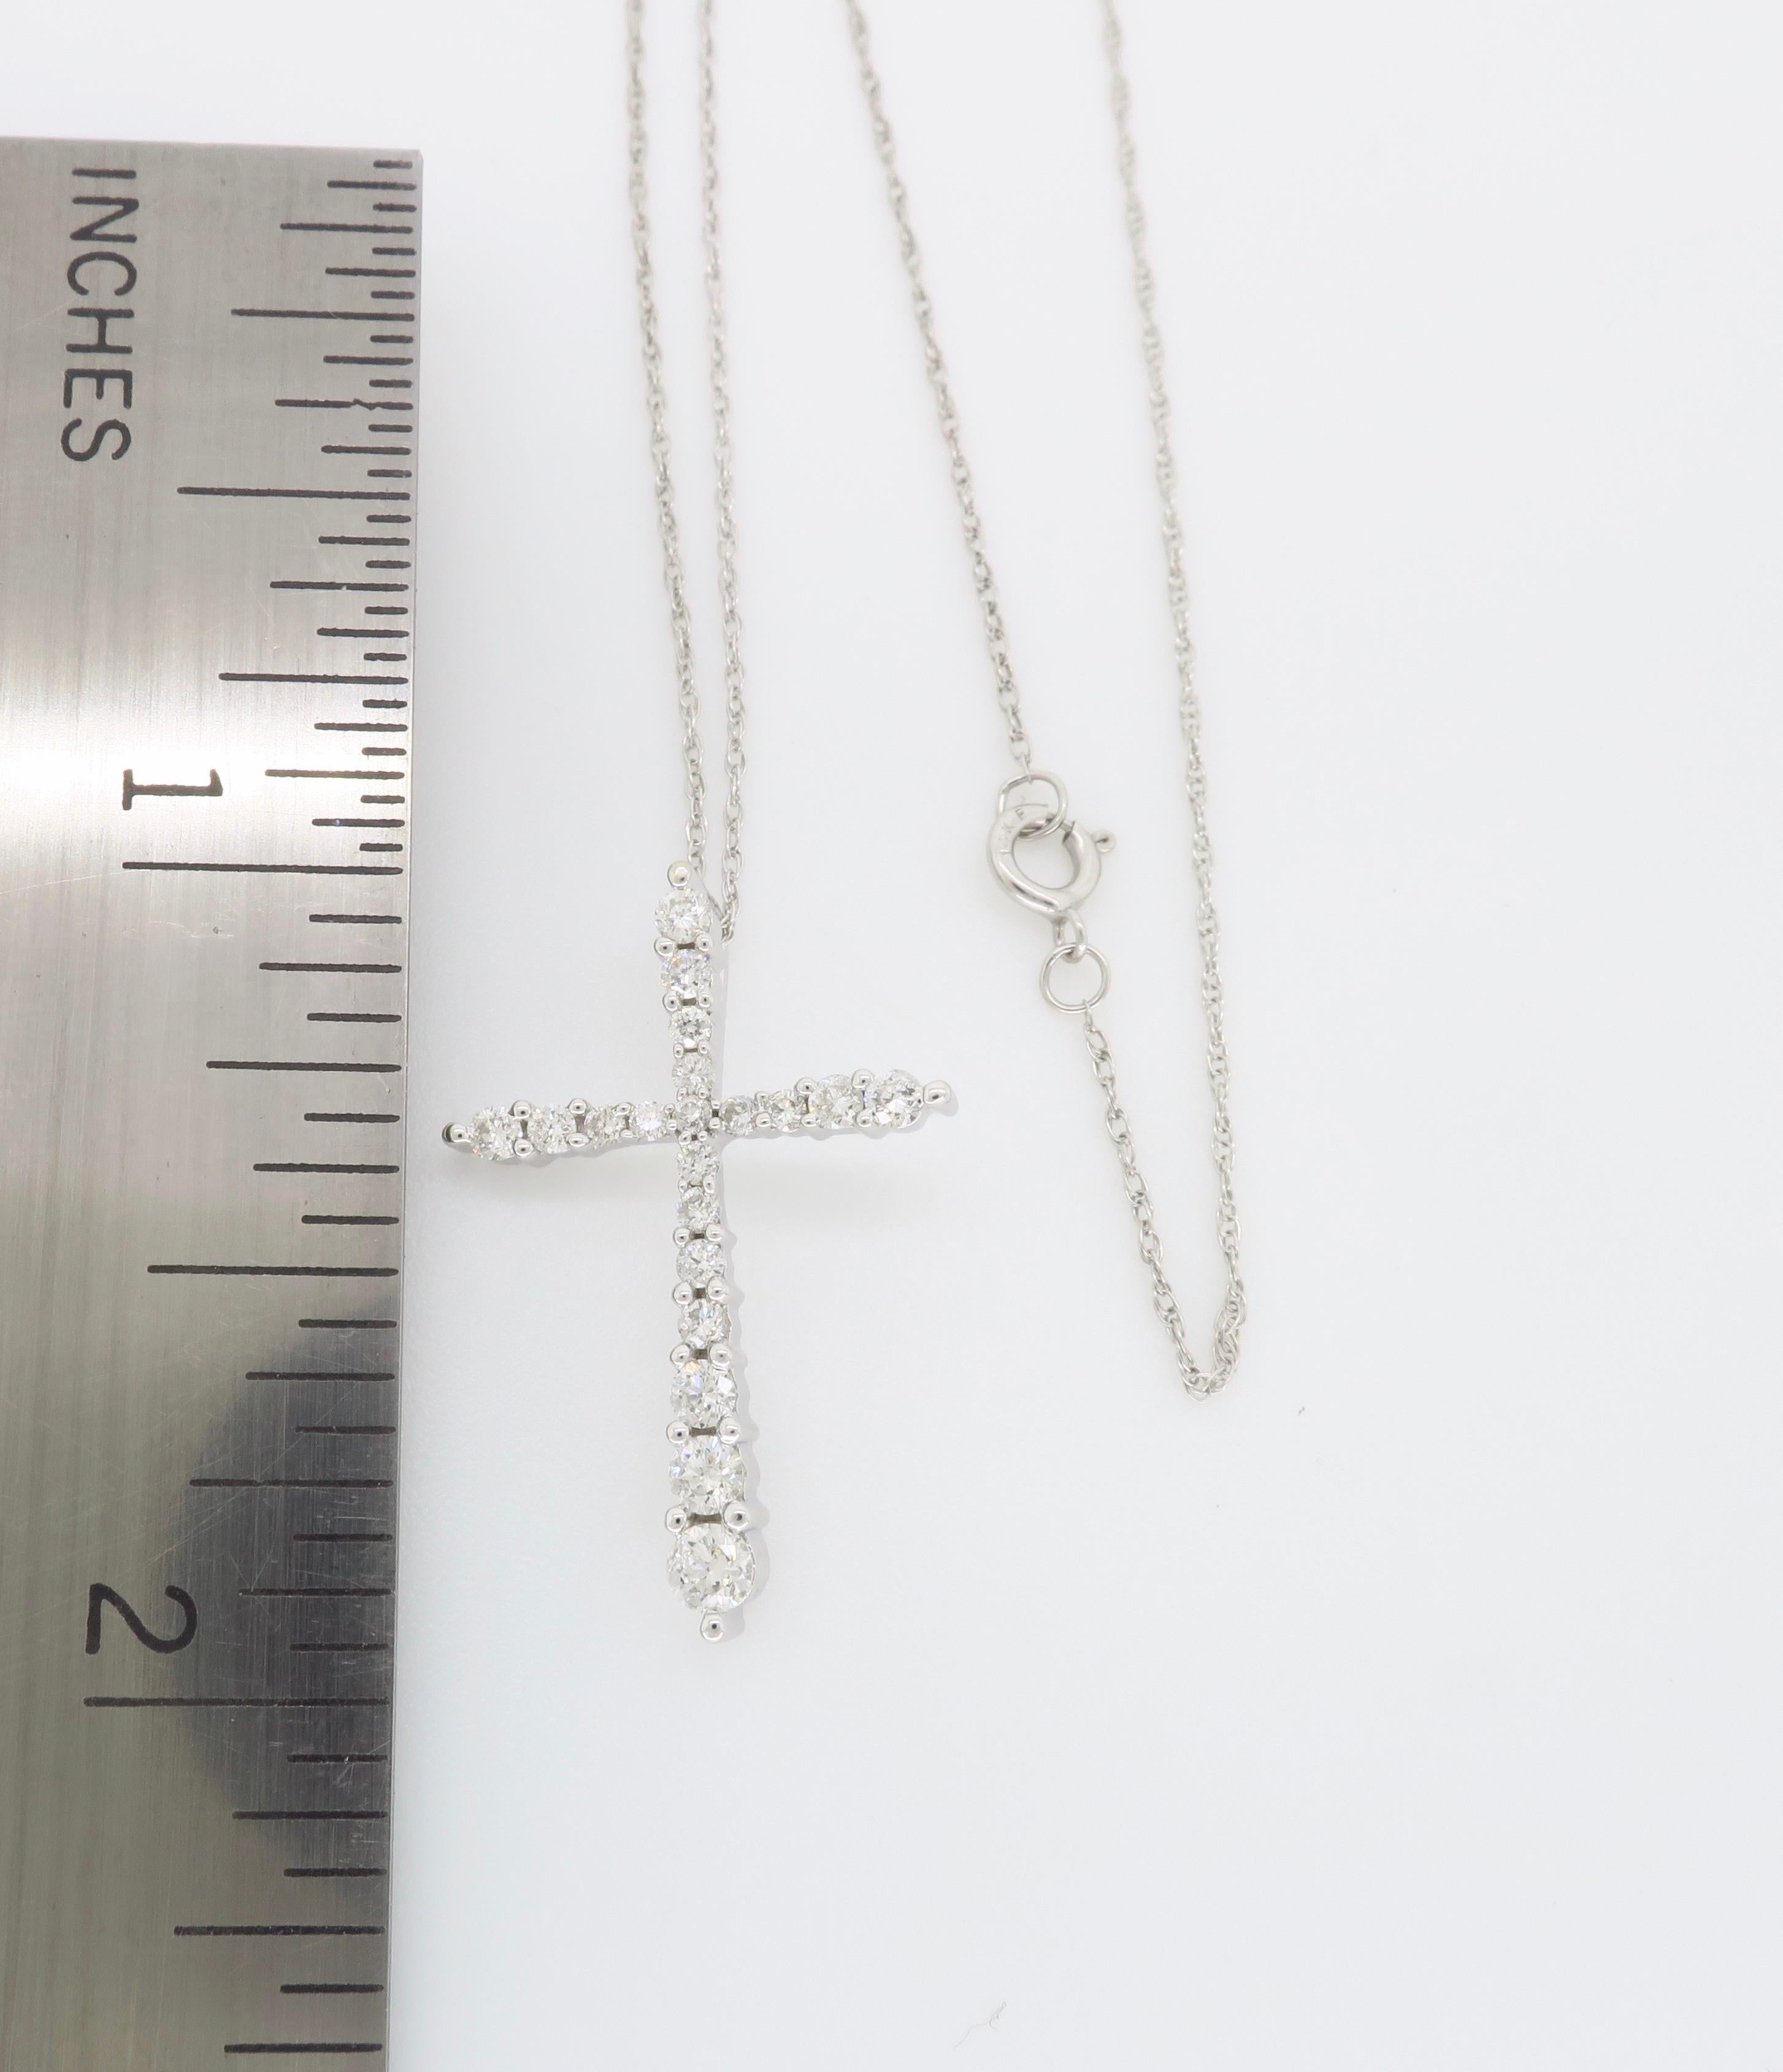 Graduated diamond cross pendant necklace crafted in 14k white gold.

Diamond Carat Weight: Approximately .40CTW
Diamond Cut: Round Brilliant Cut Diamonds
Color: Average G-I
Clarity: Average I
Metal: 14K White Gold
Marked/Tested: Stamped “14KT”